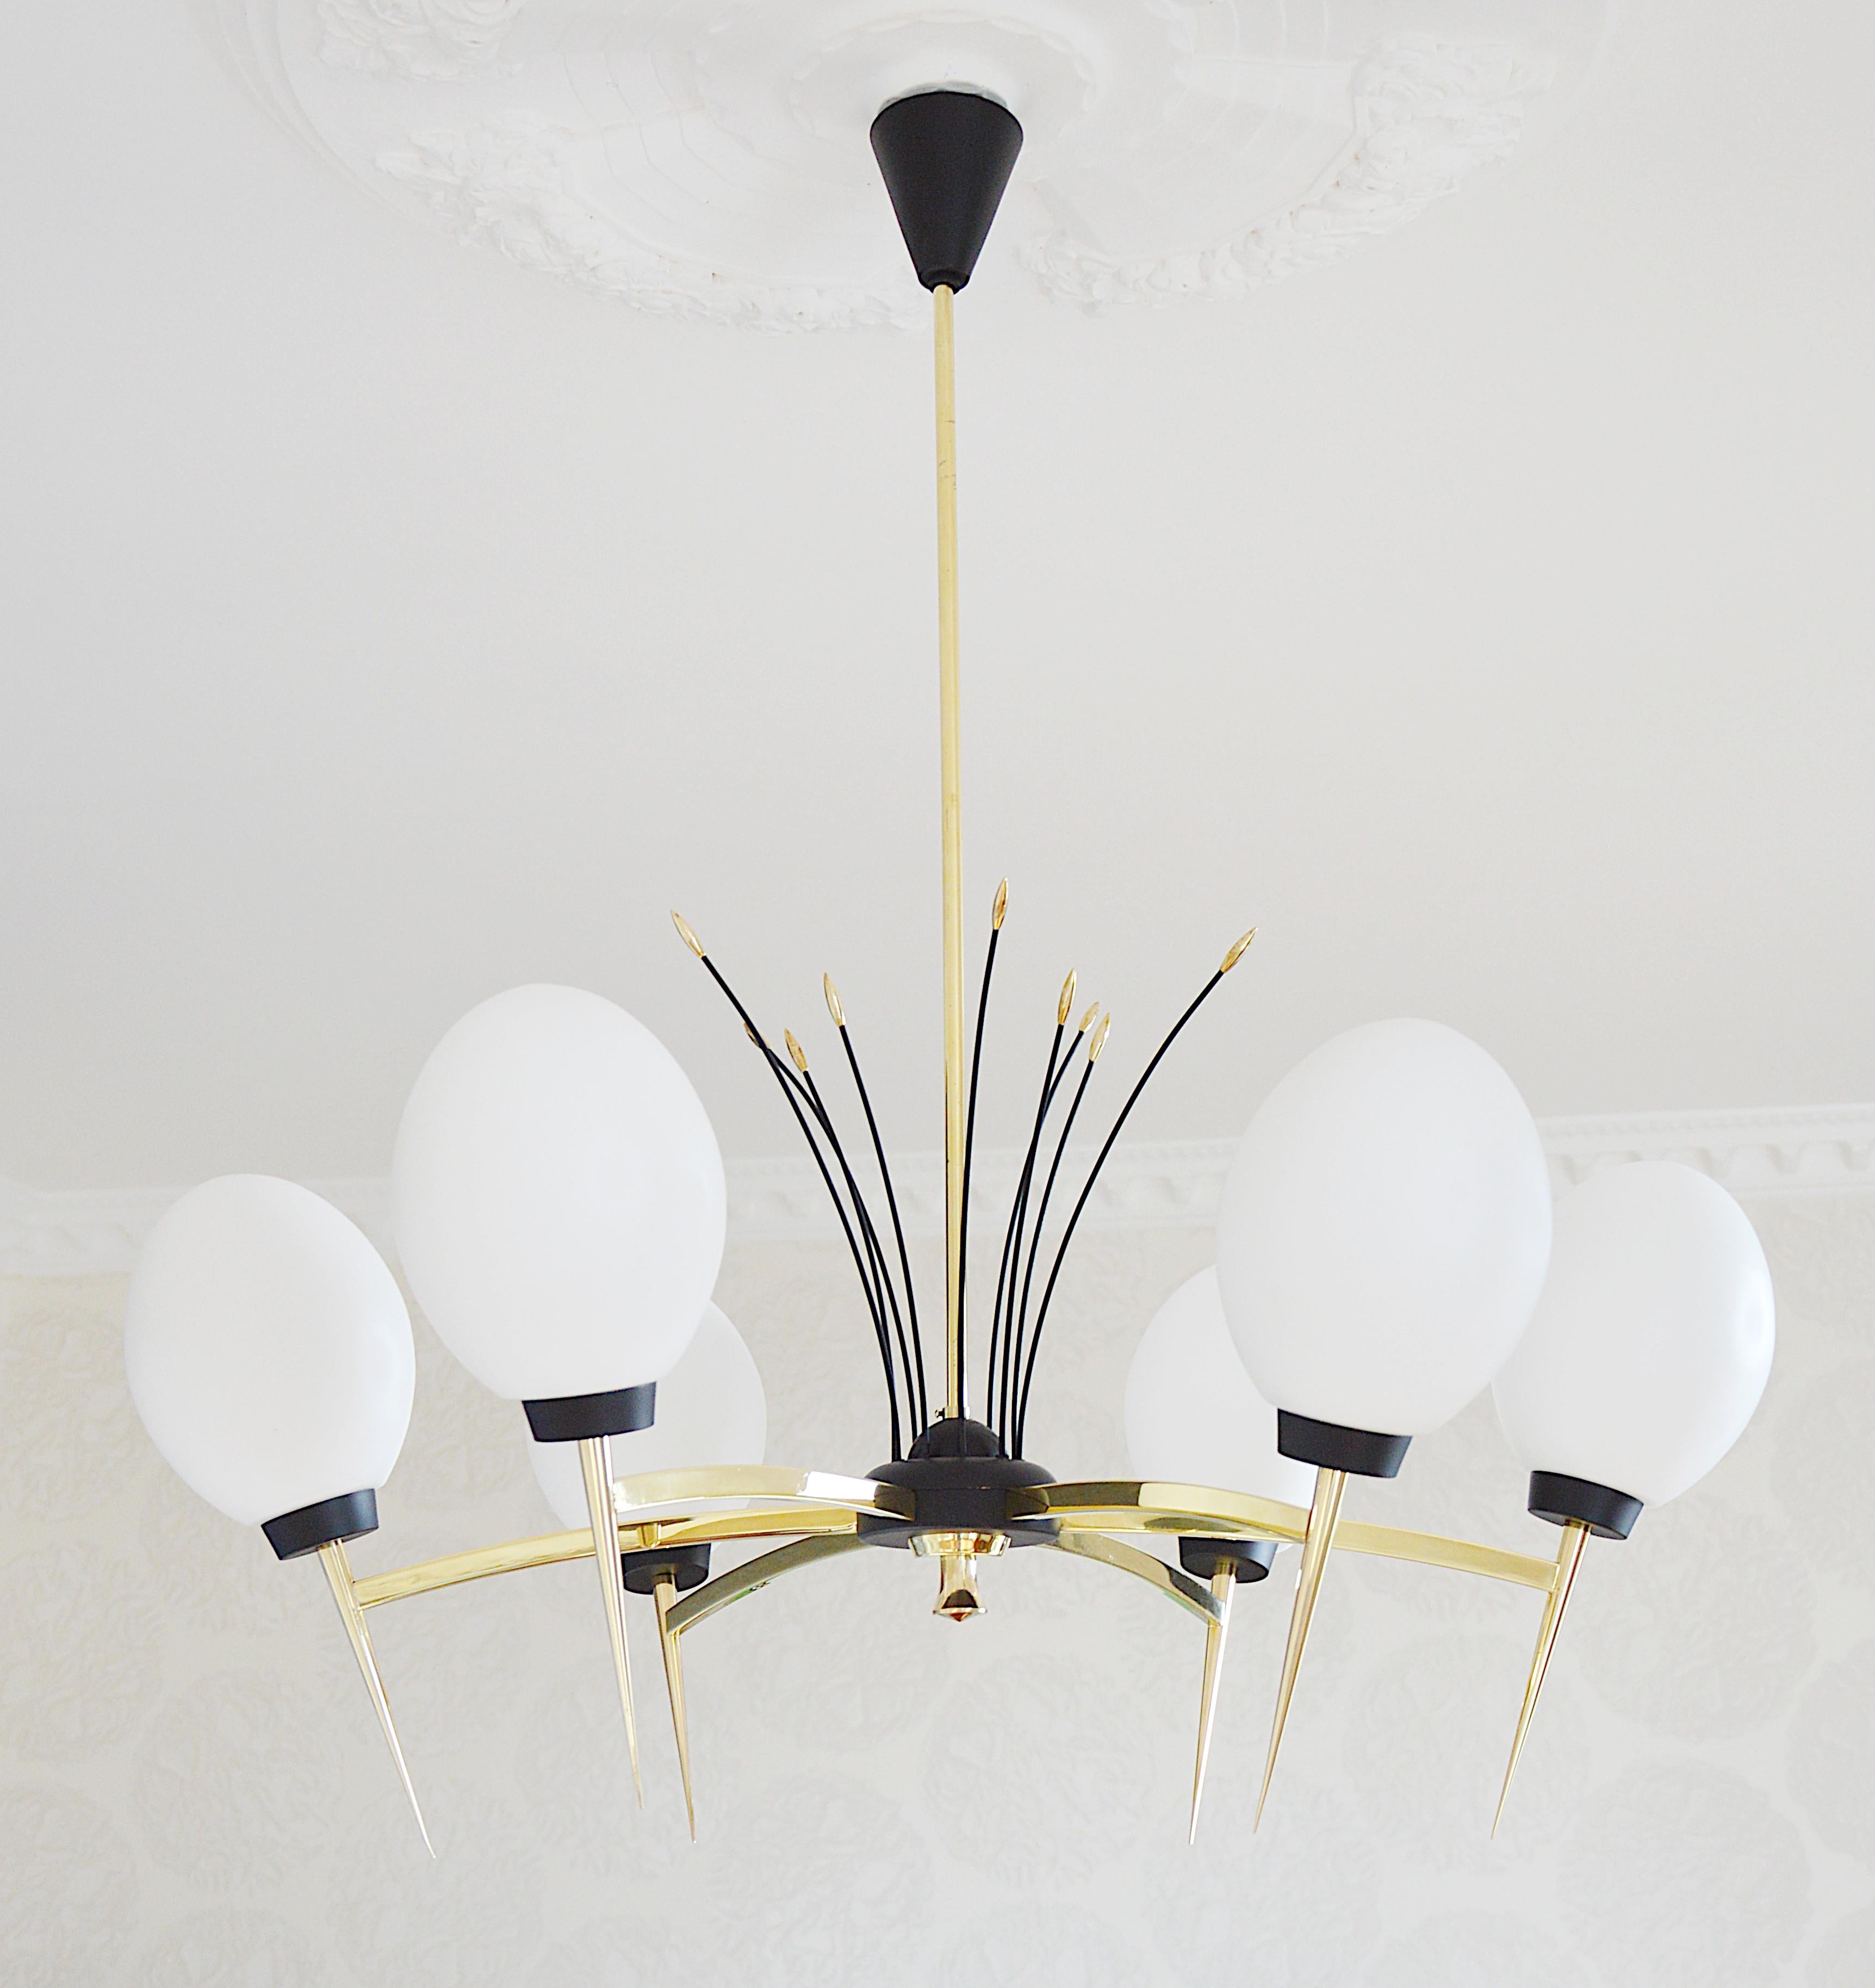 Lunel Gorgeous French Midcentury Chandelier, 1950s For Sale 3